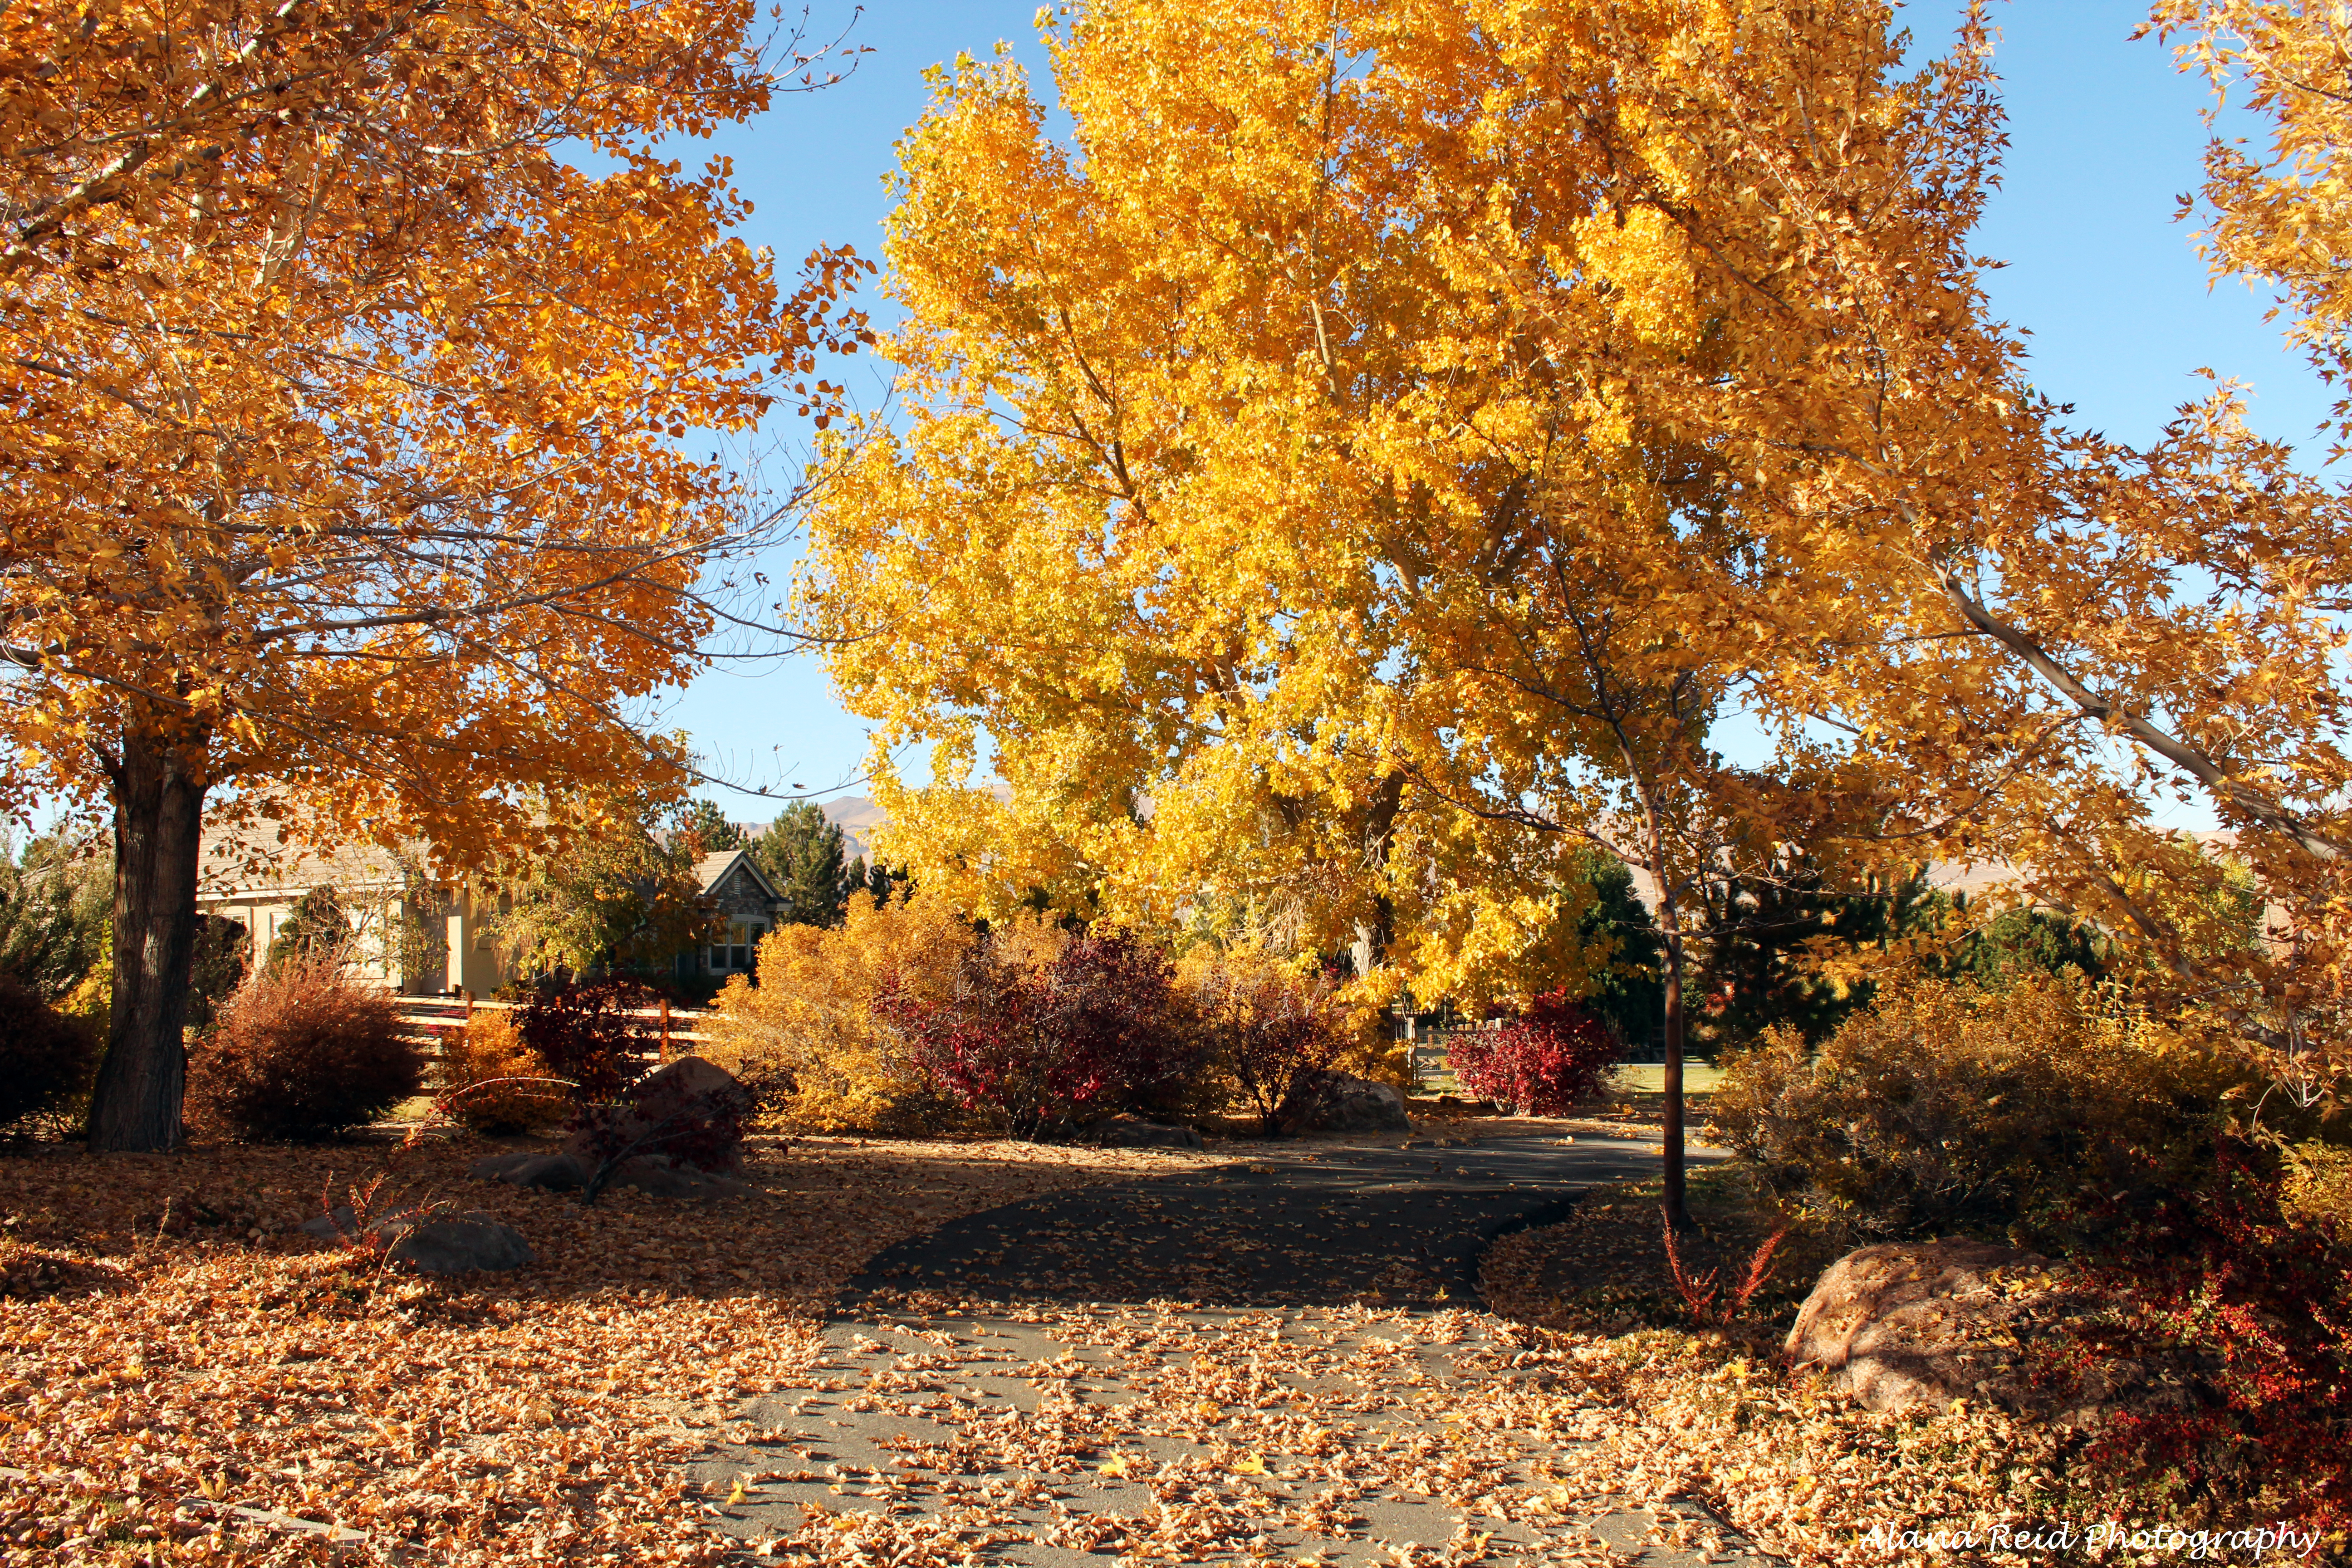 17 Activities To Do In Reno During The Fall Season